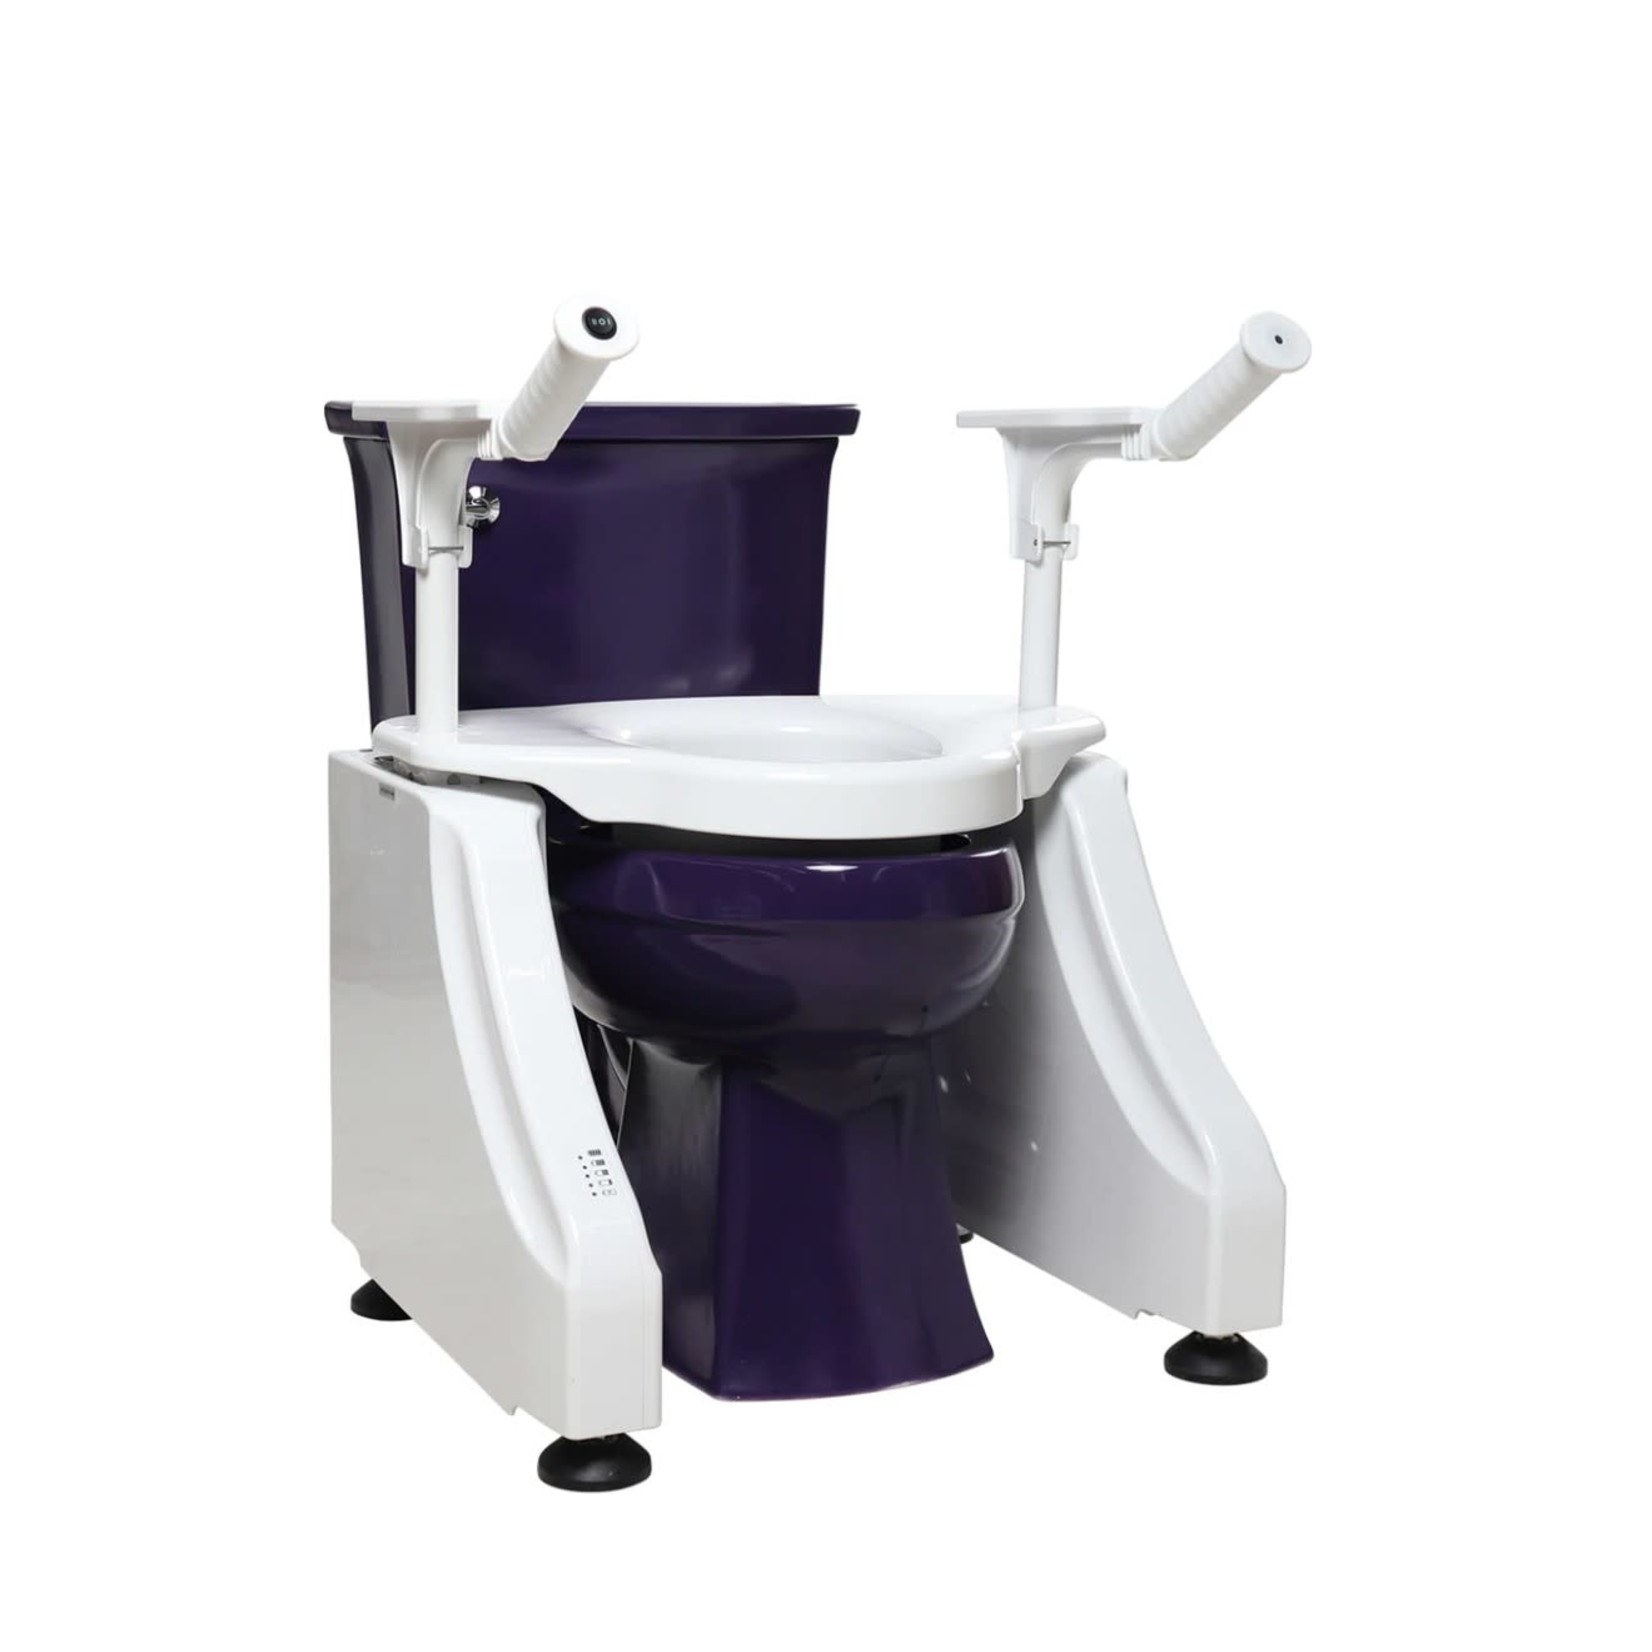 Dignity Lifts Deluxe Toilet Lift - White